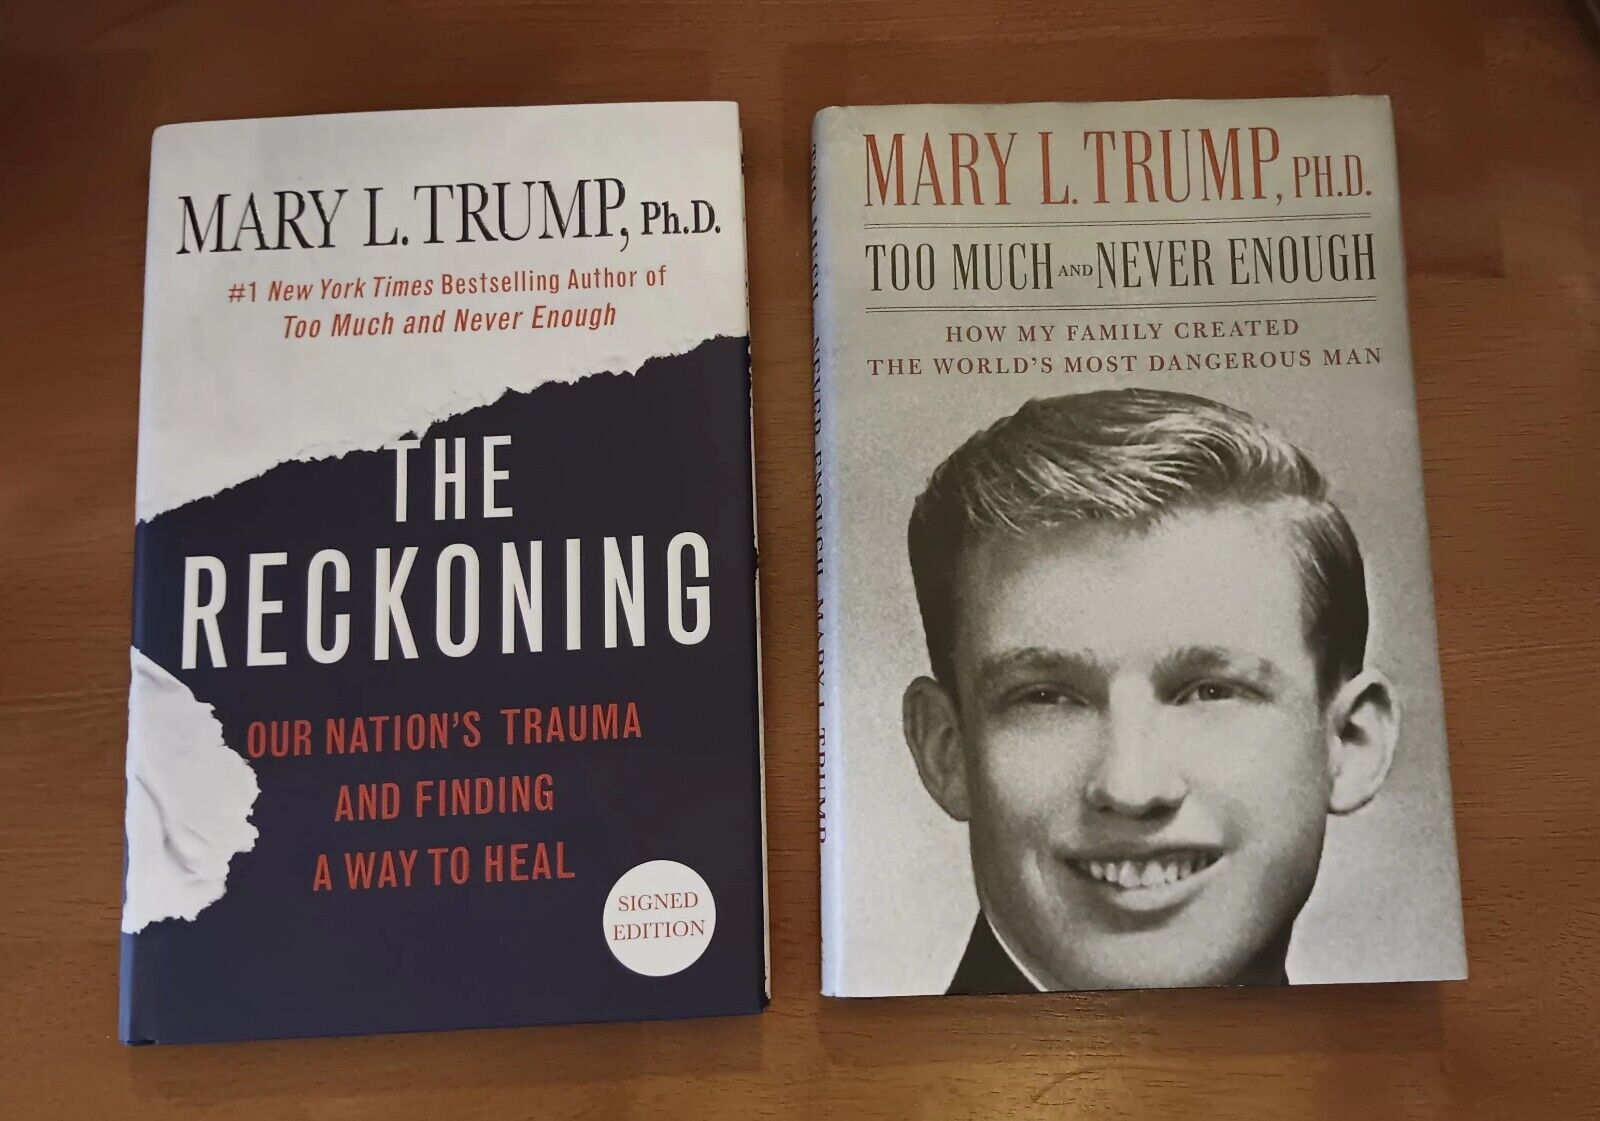 Lot Of 2 Hardback Books By Mary L Trump, PhD-Signed THE RECKONING